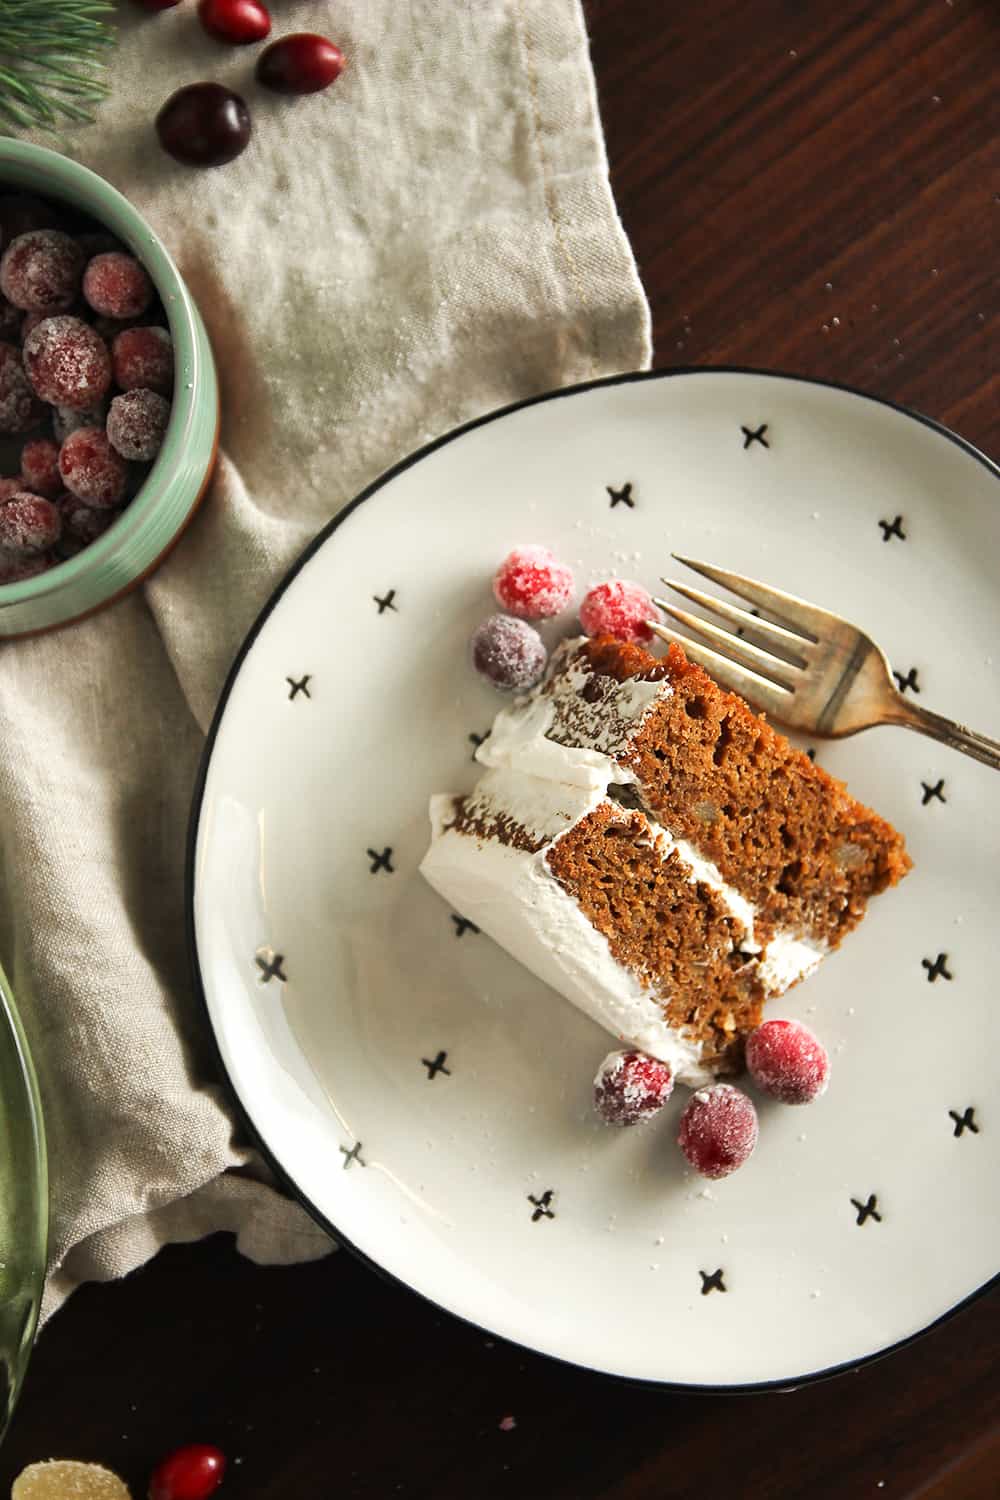 Gingerbread Layer Cake is garnished with sugared cranberries for a perfectly festive dessert